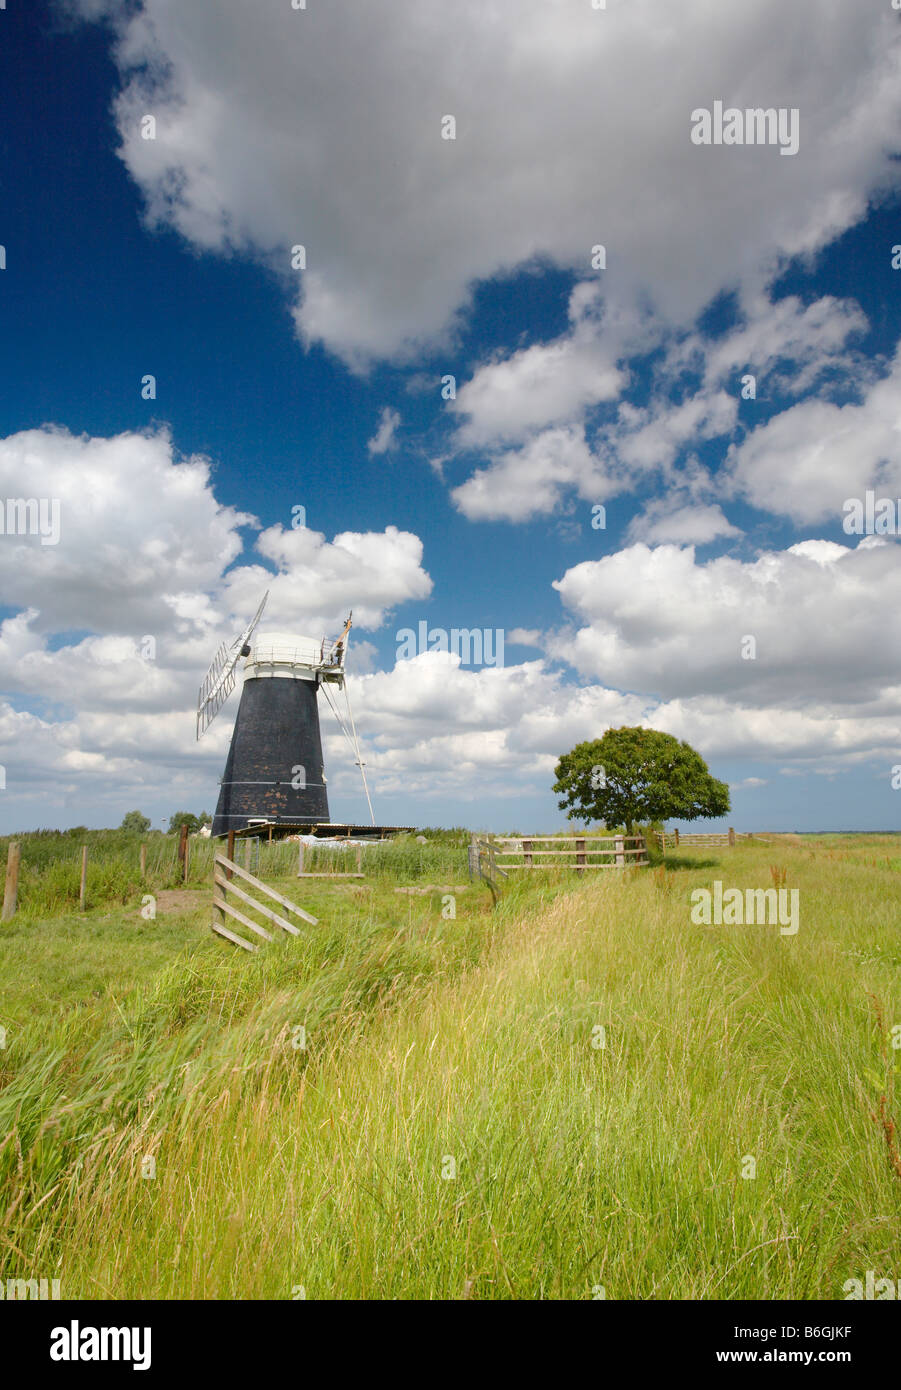 Muttons Drainage Mill, on the Halvergate Marshes, Norfolk Broads Stock Photo